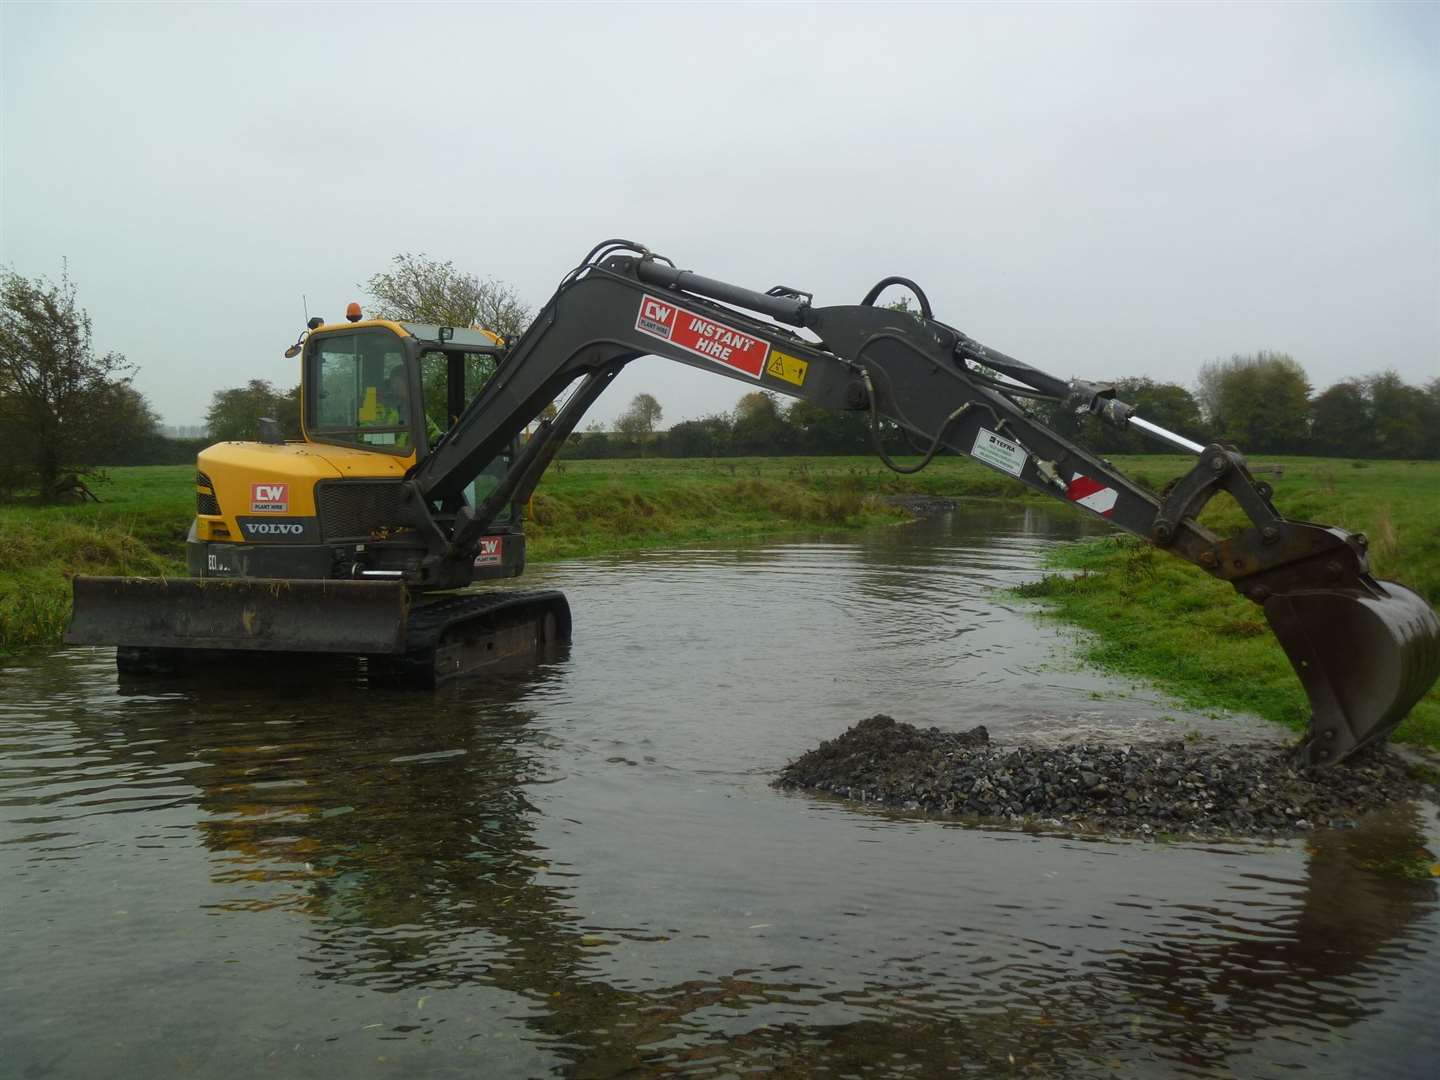 Mechanical excavators carried out the project to narrow the river bed, allowing wildlife to flourish. Picture: Environment Agency